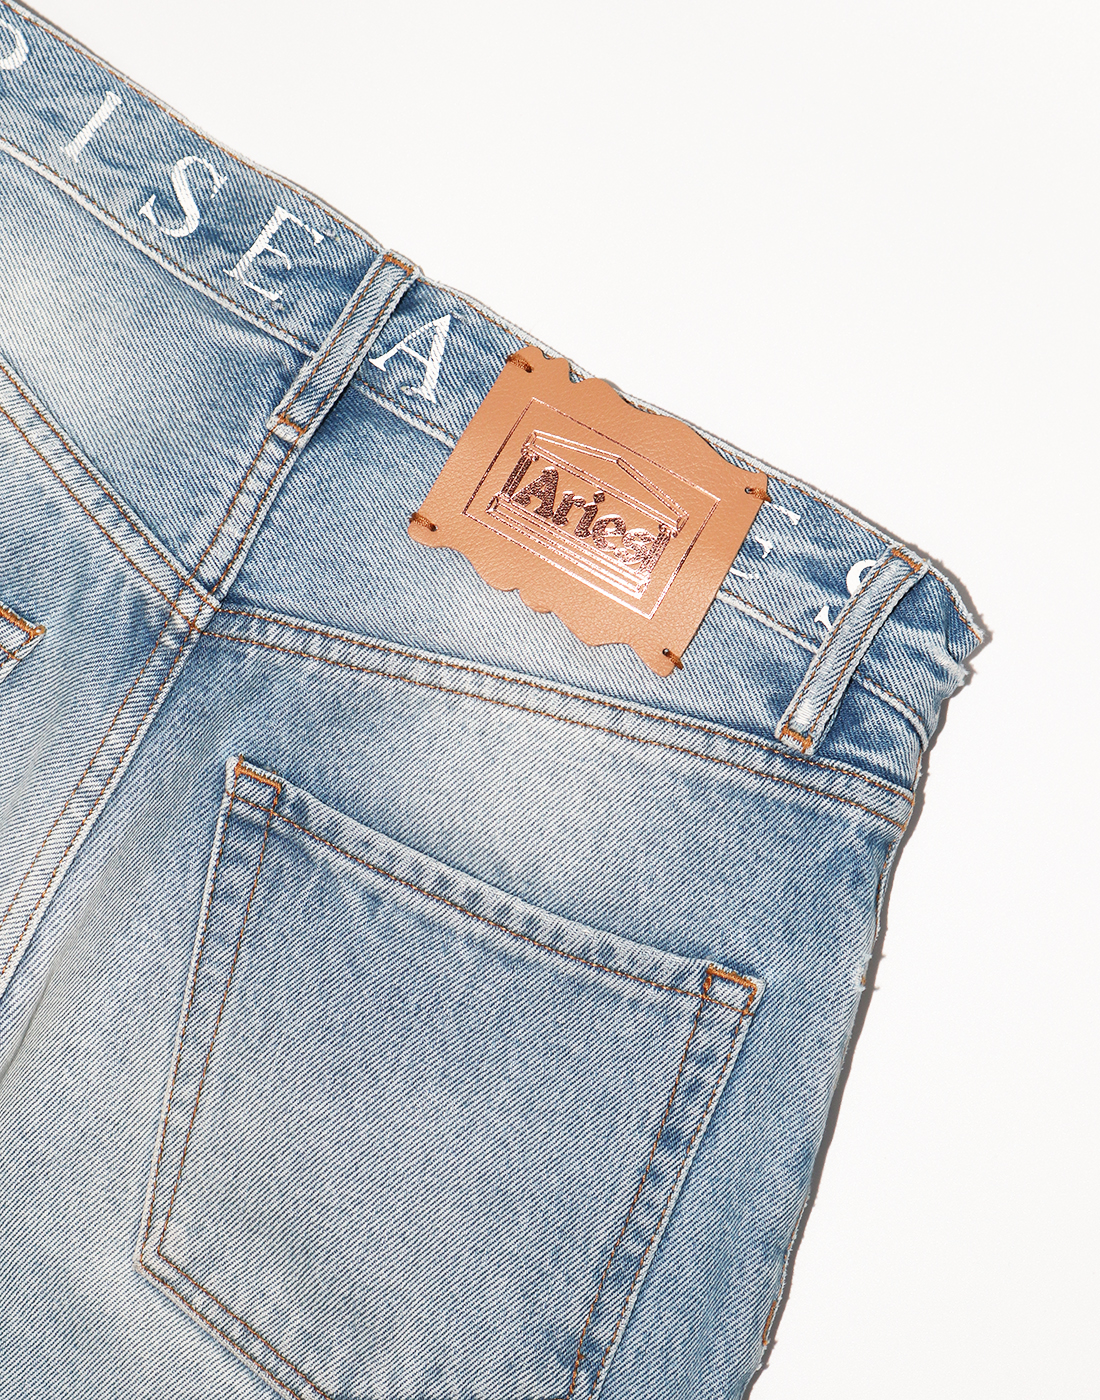 ARIES Logo Lilly Jeans, Light Wash